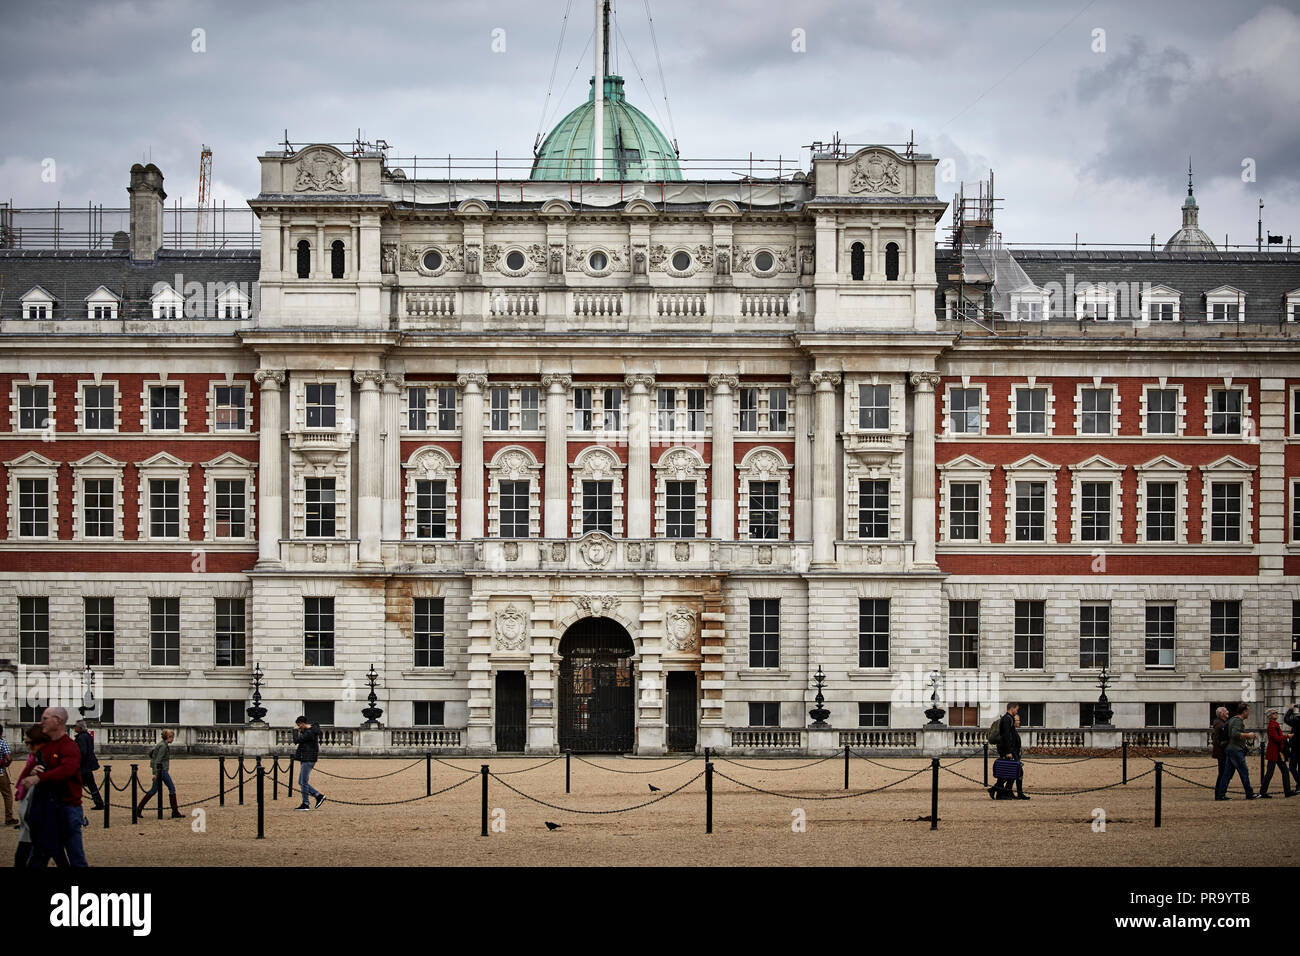 The Admiralty Extension Old Admiralty Horse Guards Parade Whitehall in London the capital city of England Stock Photo